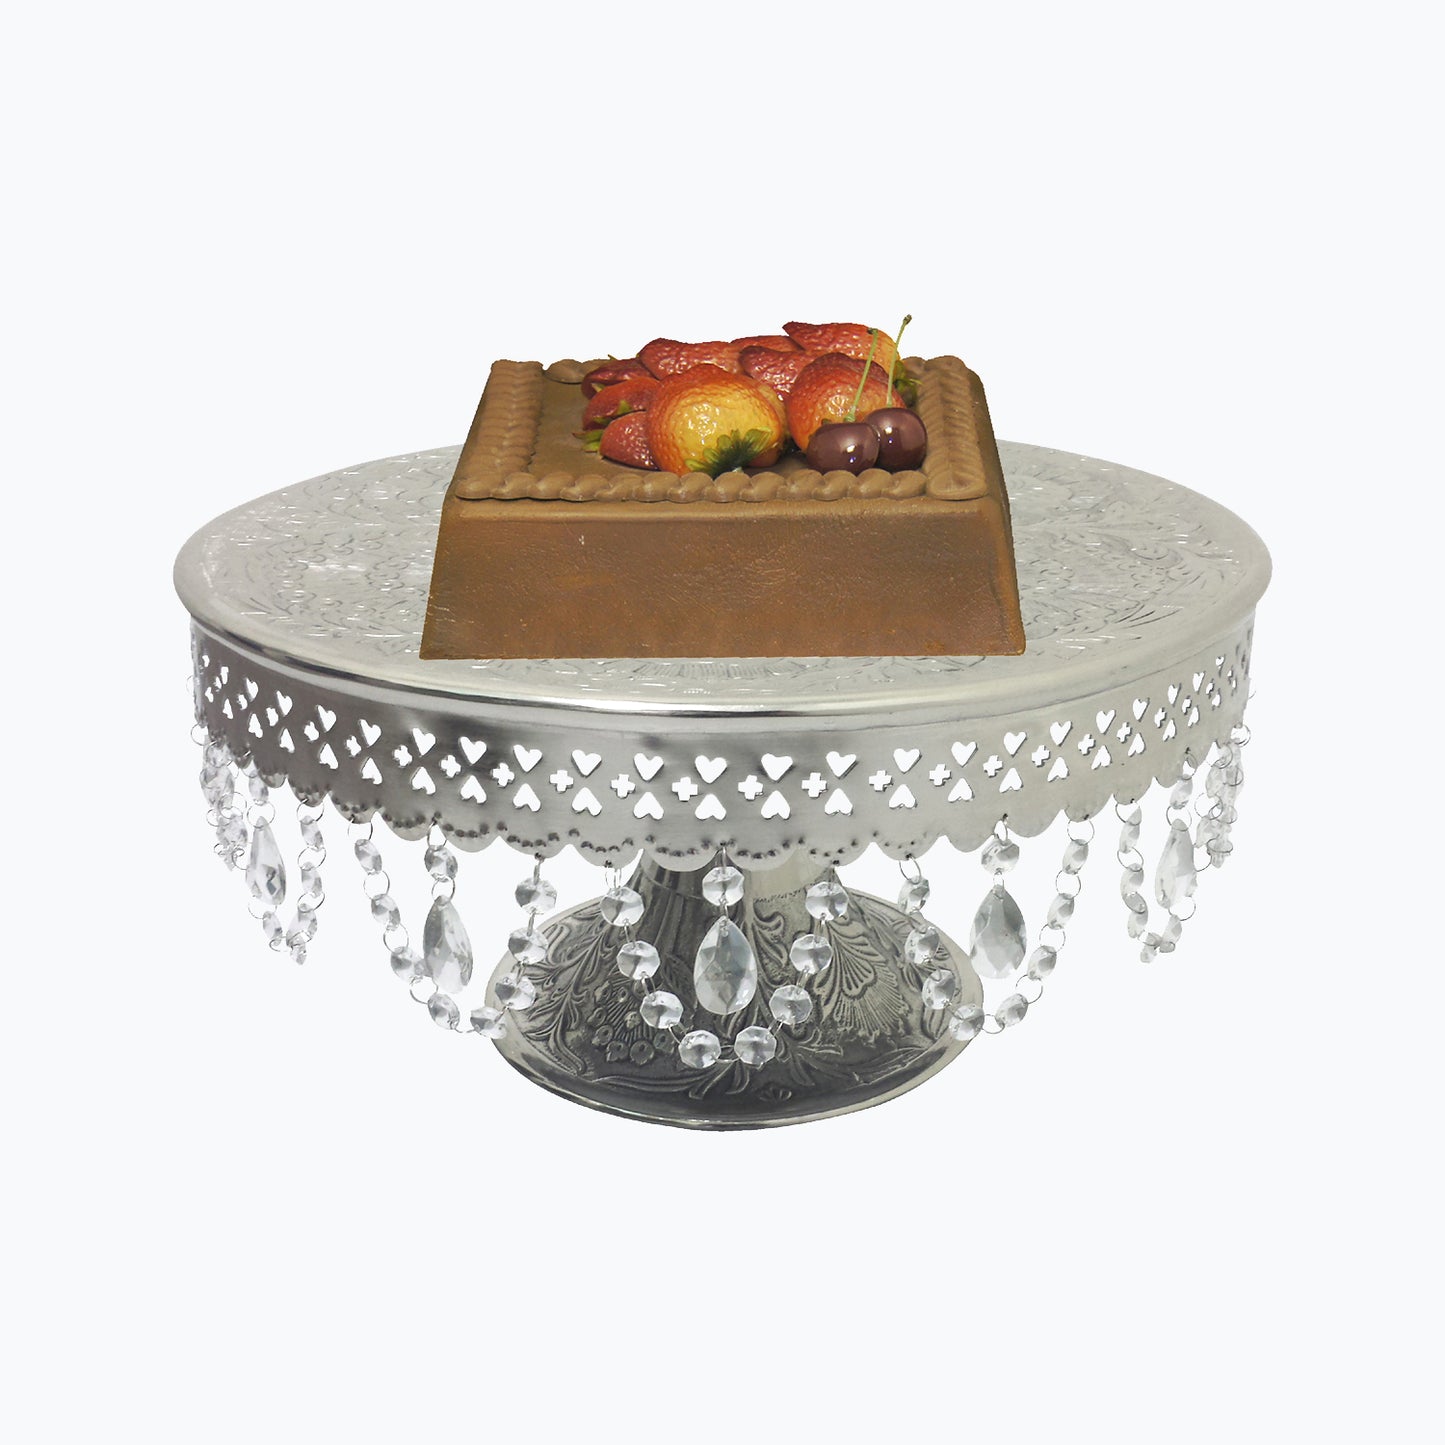 GiftBay Creations® Pedestal Cake Stand Silver, 16" with Clear Crystals